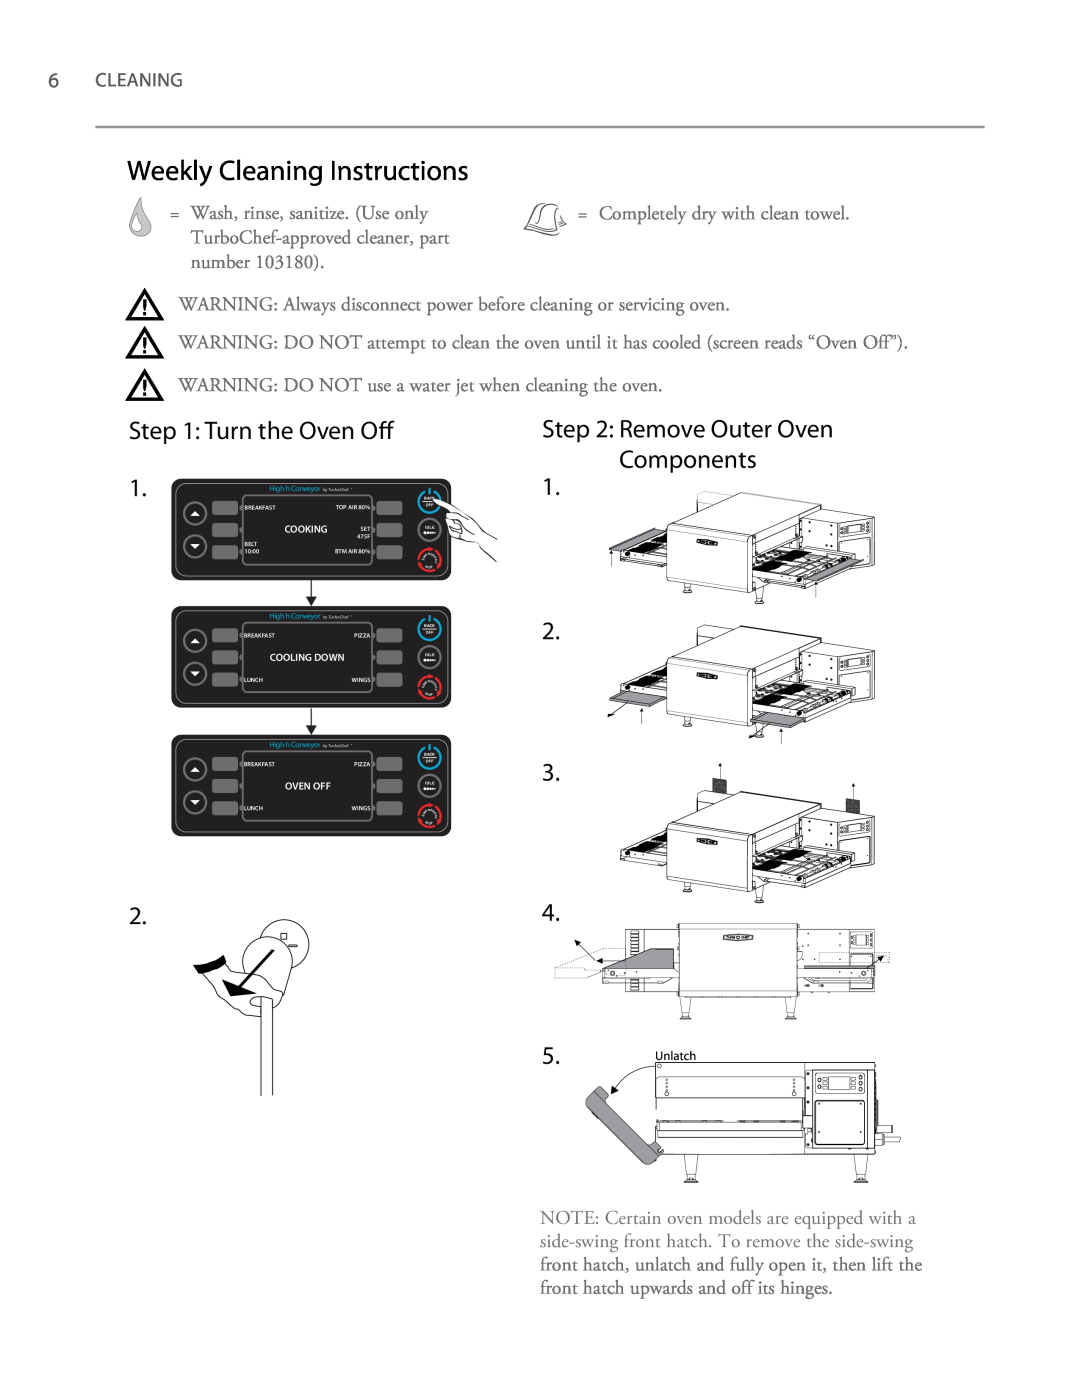 Turbo Chef Technologies 2620, 2020 owner manual Weekly Cleaning Instructions, Turn the Oven O, Remove Outer Oven Components 